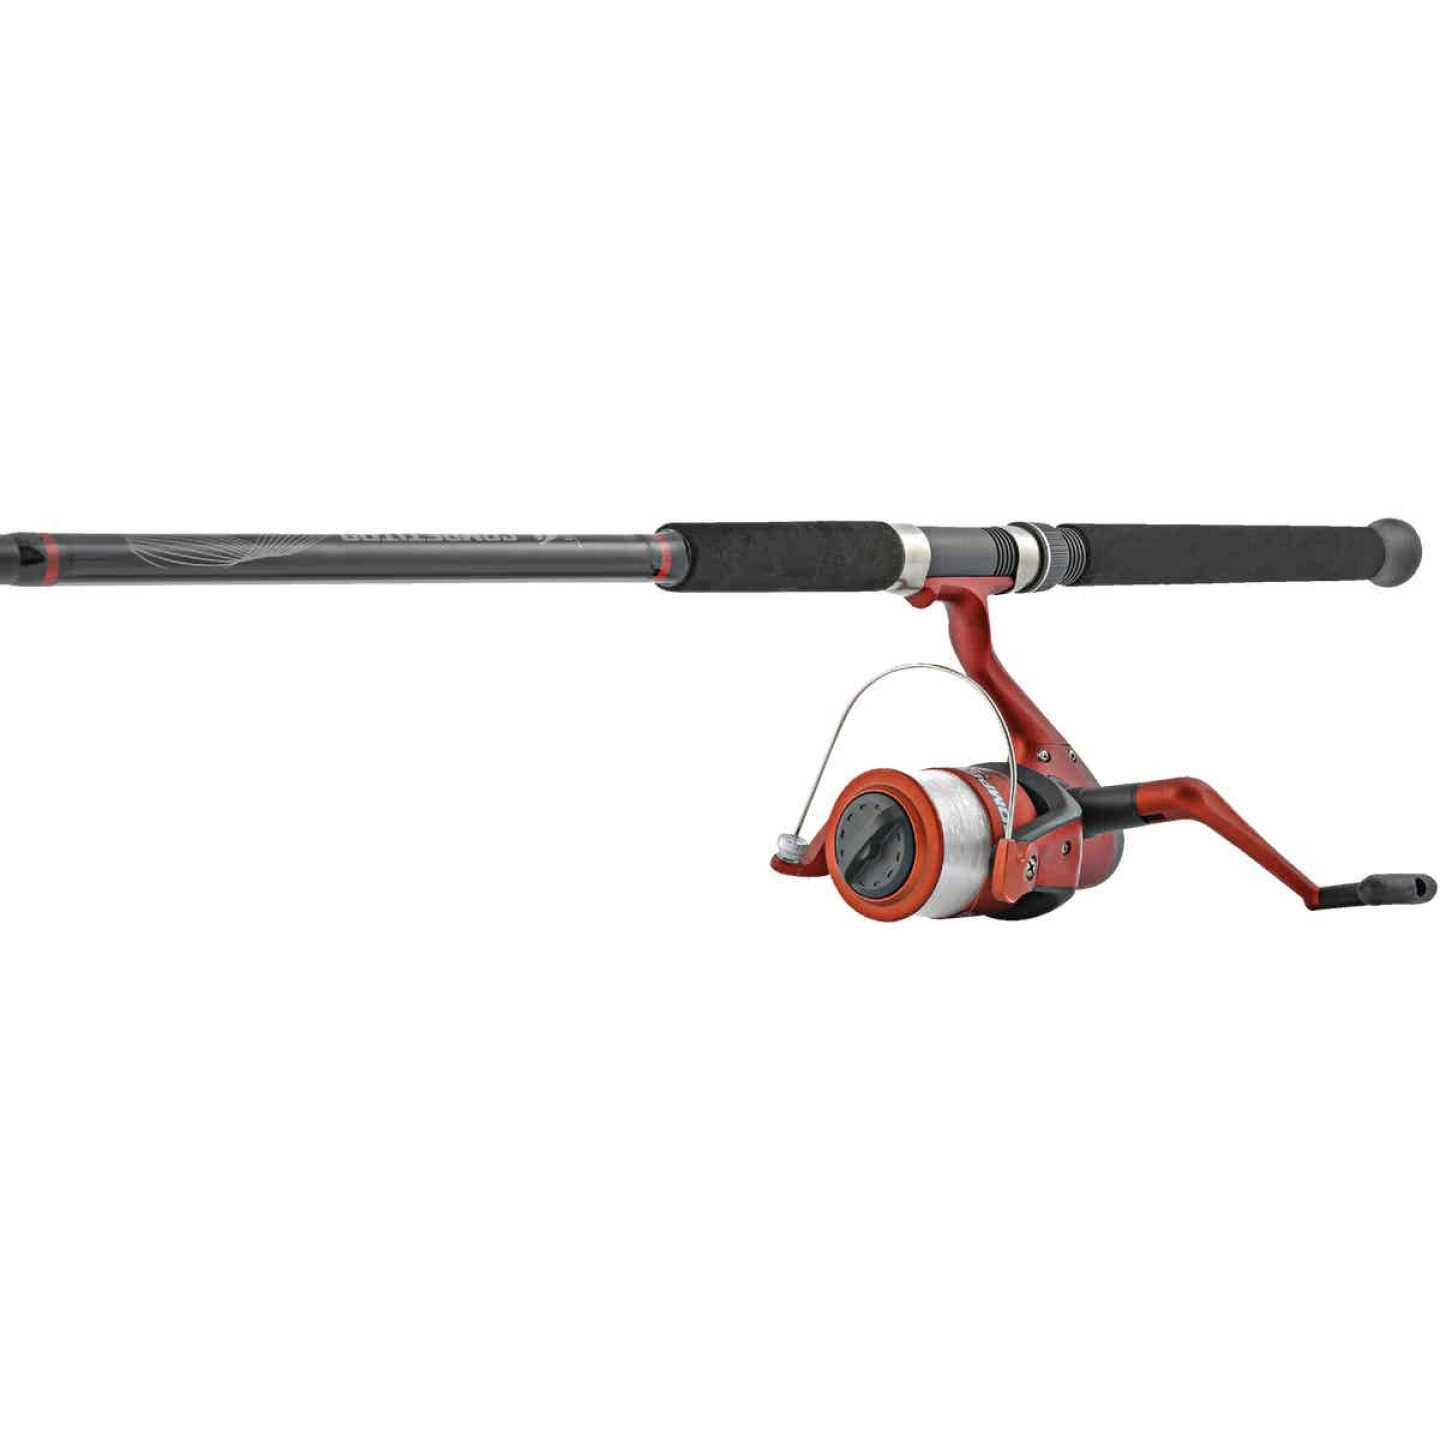 Competitor 7 Ft. Fiberglass Fishing Rod & Spinning Reel - S.W. Collins